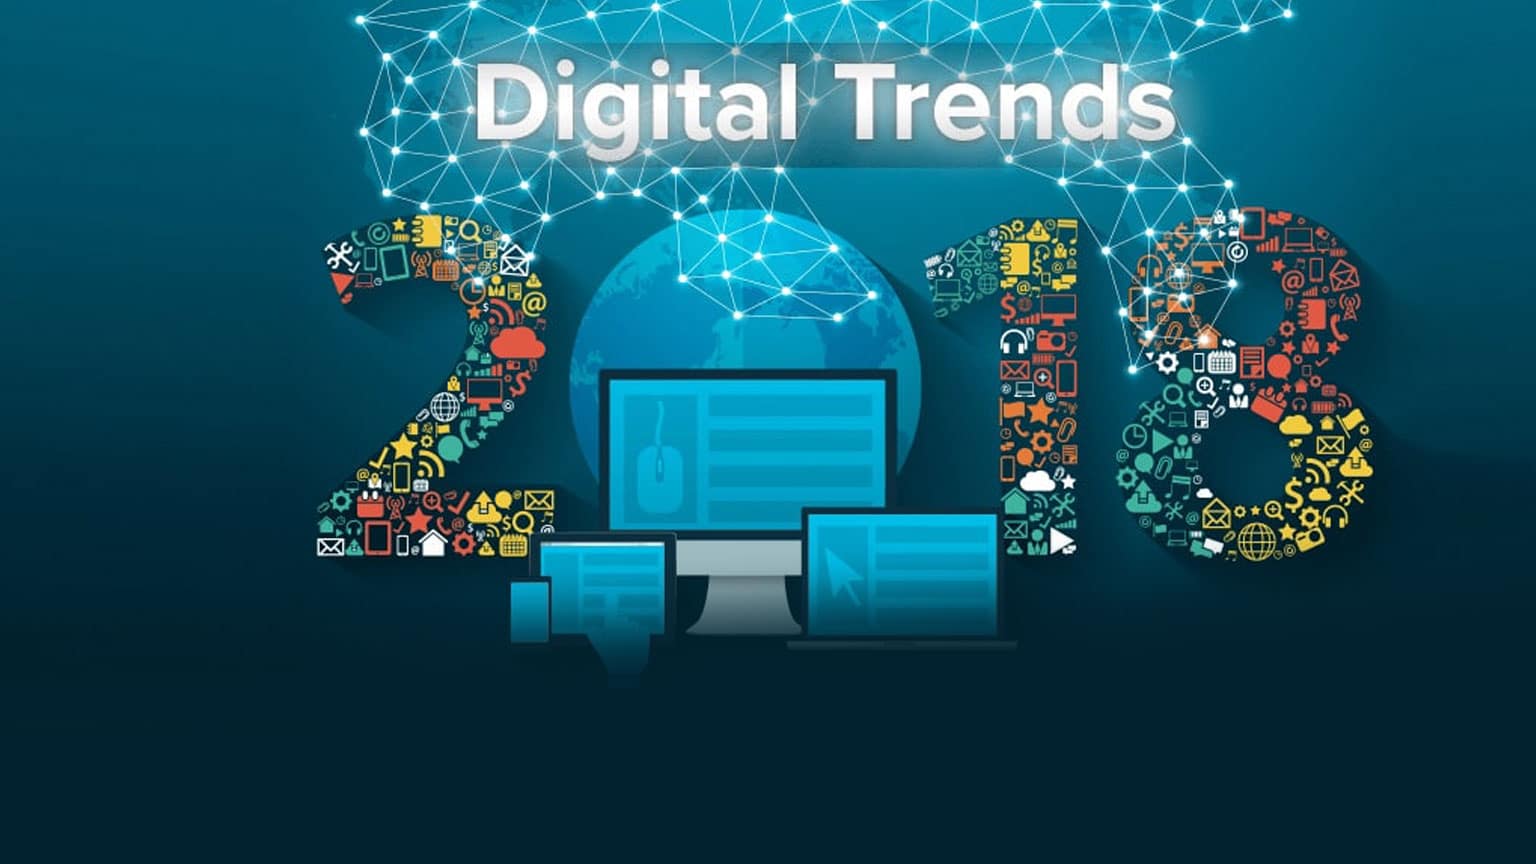 Digital Trends Of 2018 That Will Change The Face Of Adobe Experience Manager